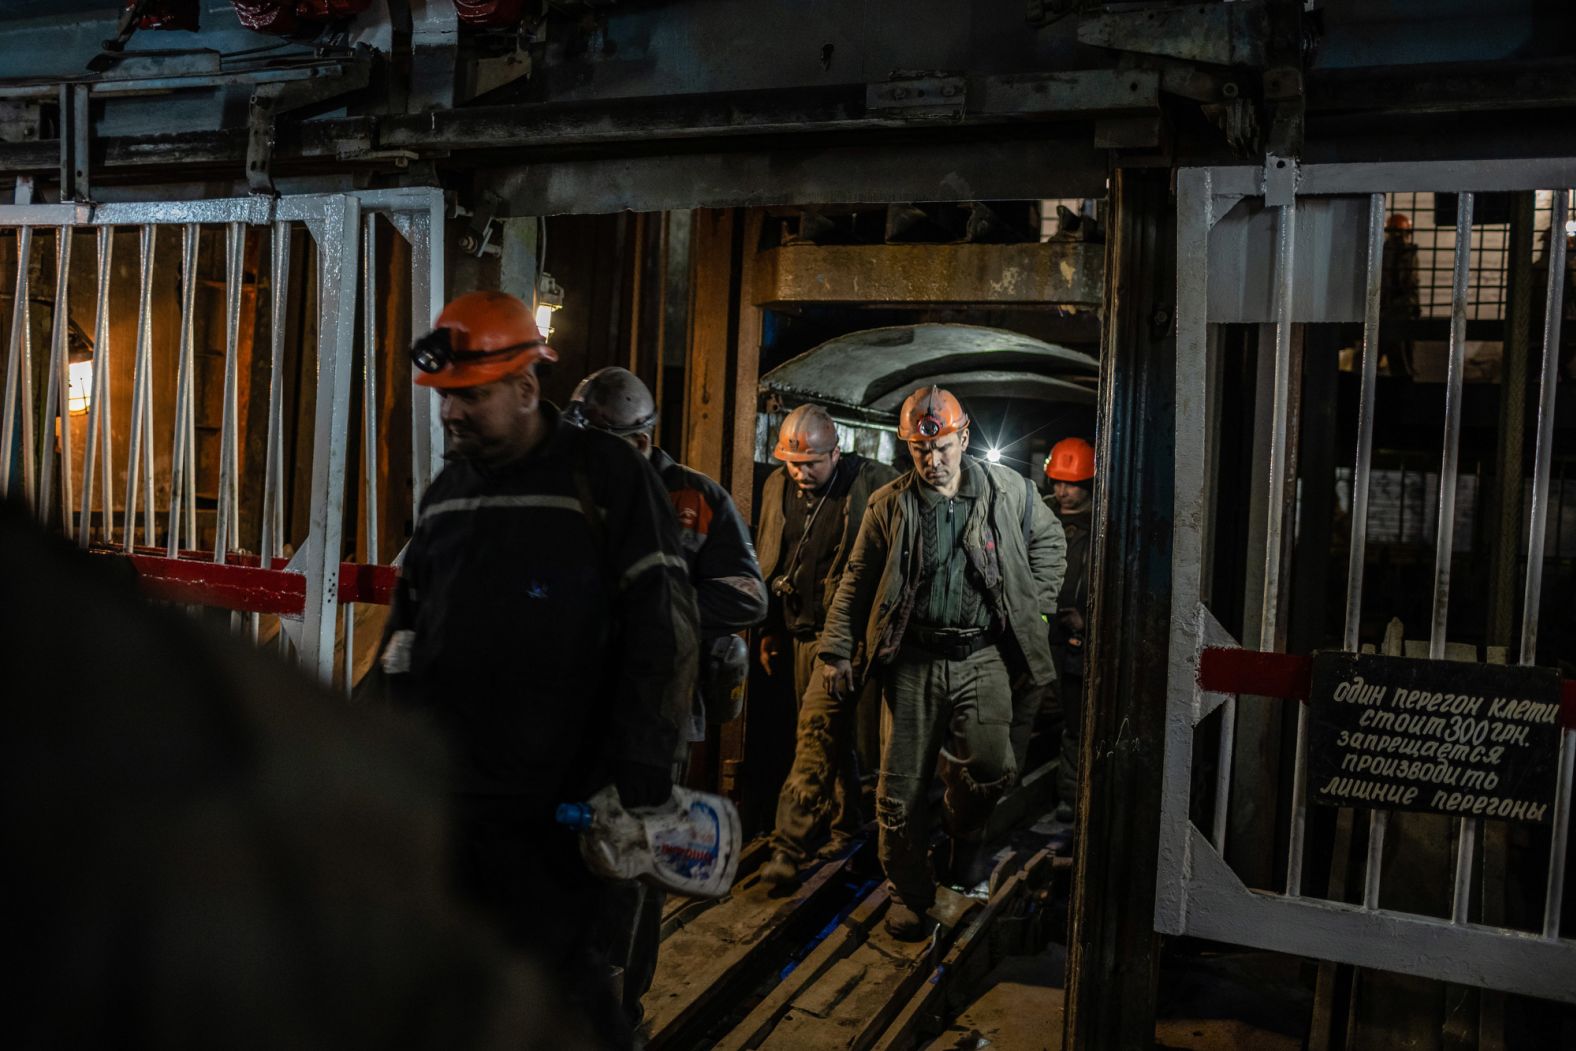 Miners ascend to the surface after a six-hour shift. This mine employs 2,150 workers, and 1,400 of them are miners, said Yevhen Viktorovych, the mine's deputy director of labor protection.